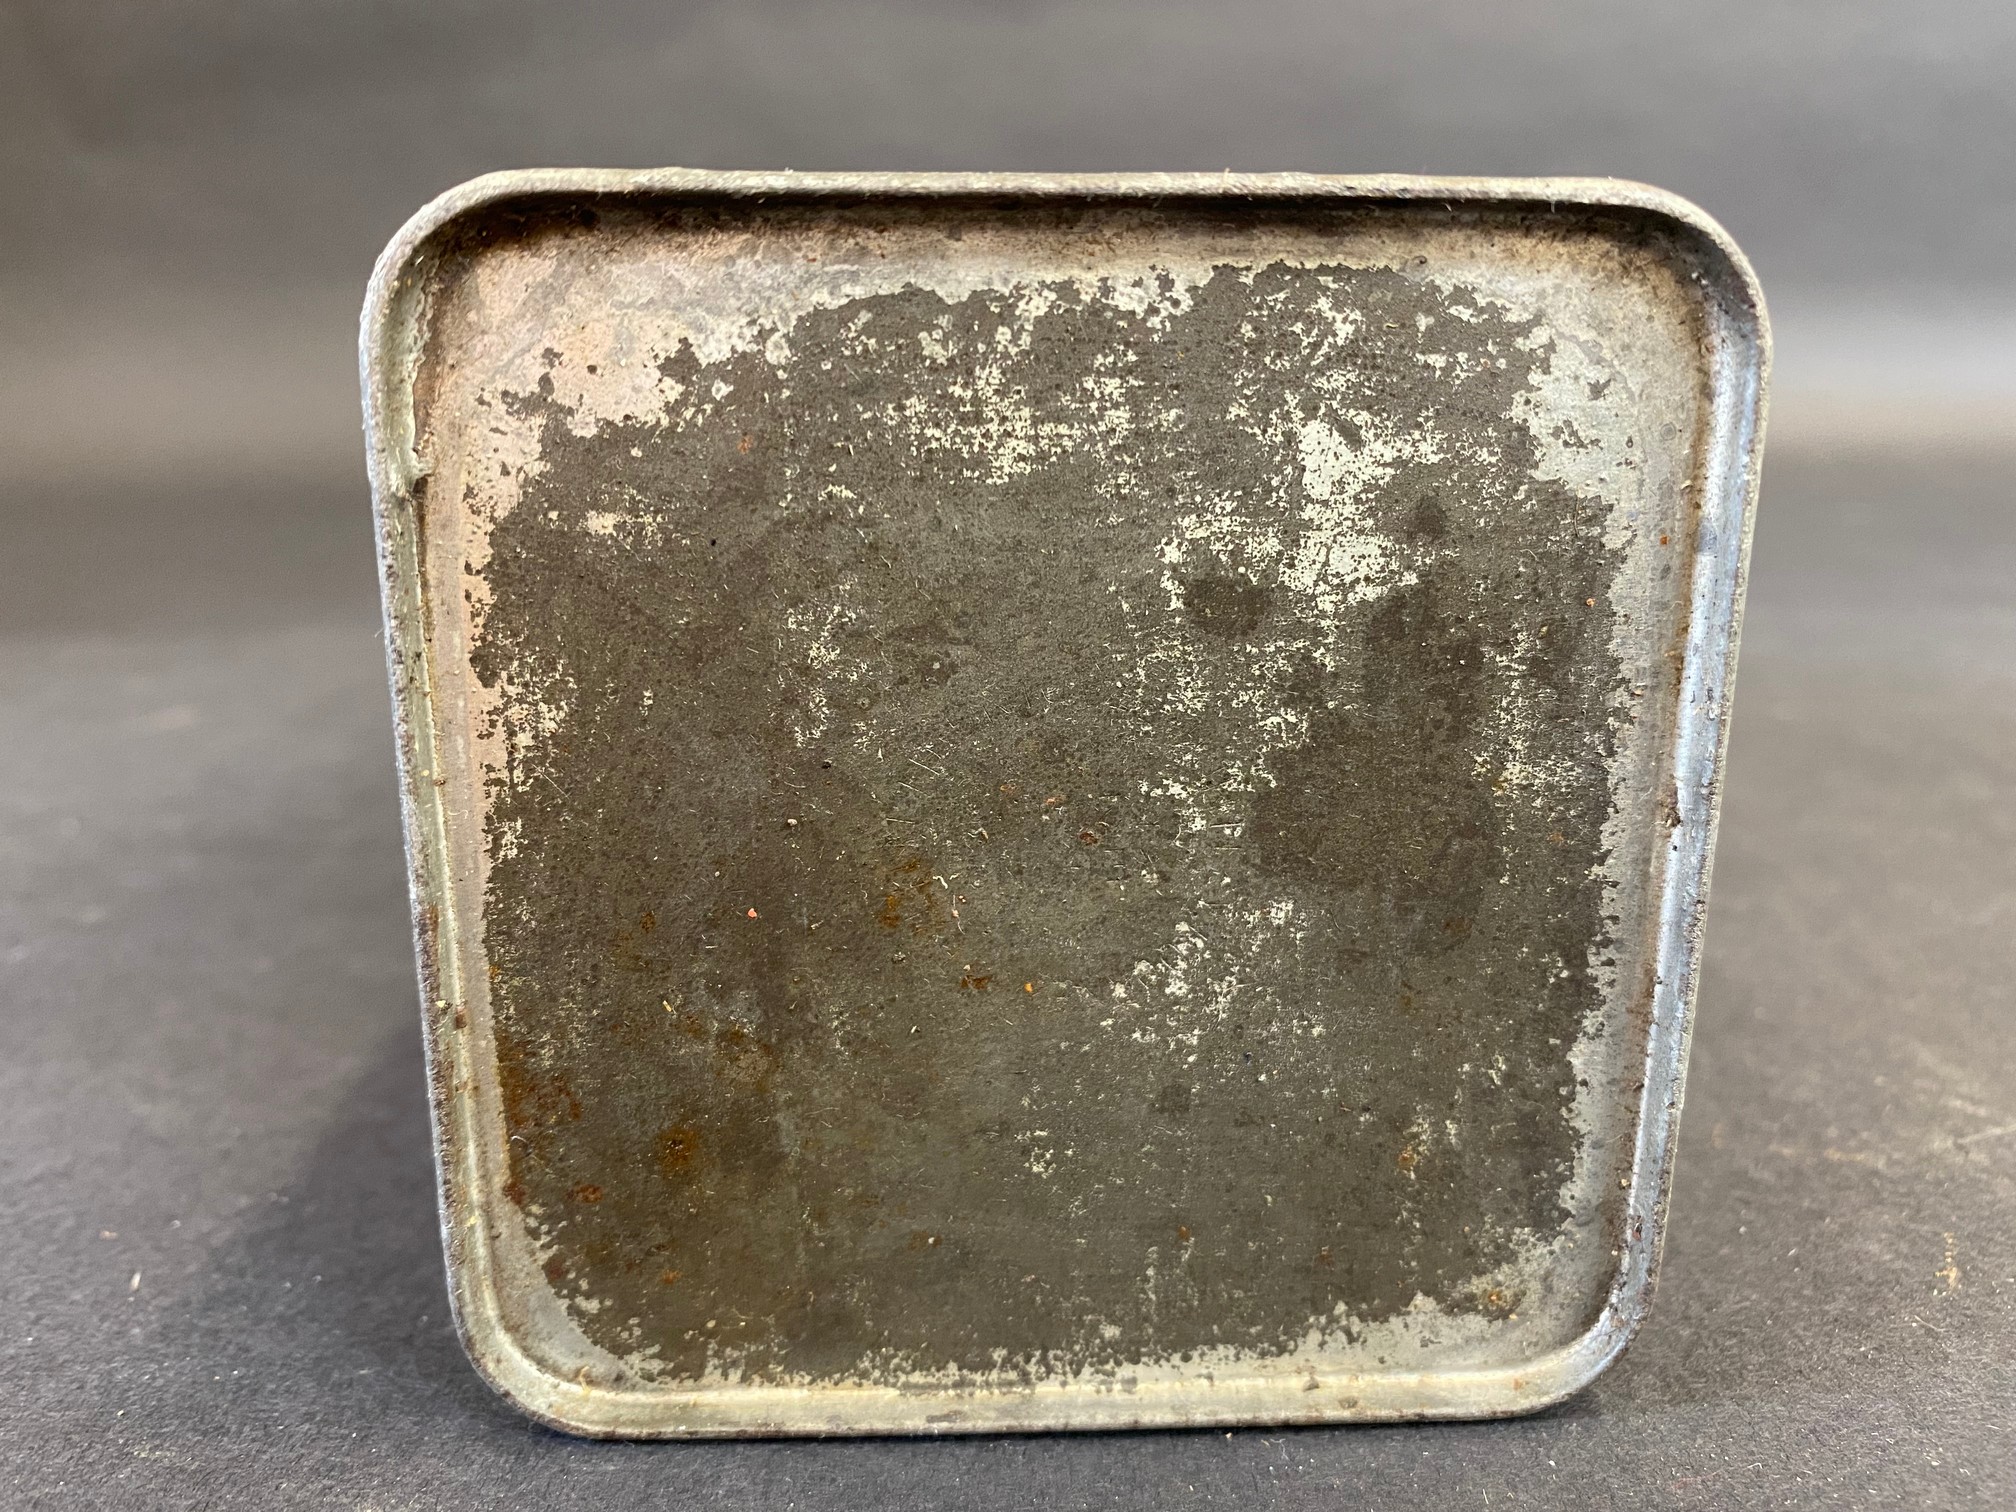 A Wakefield Castrol Gear Oil 'D' grade square caddy can, in very good condition. - Image 6 of 6